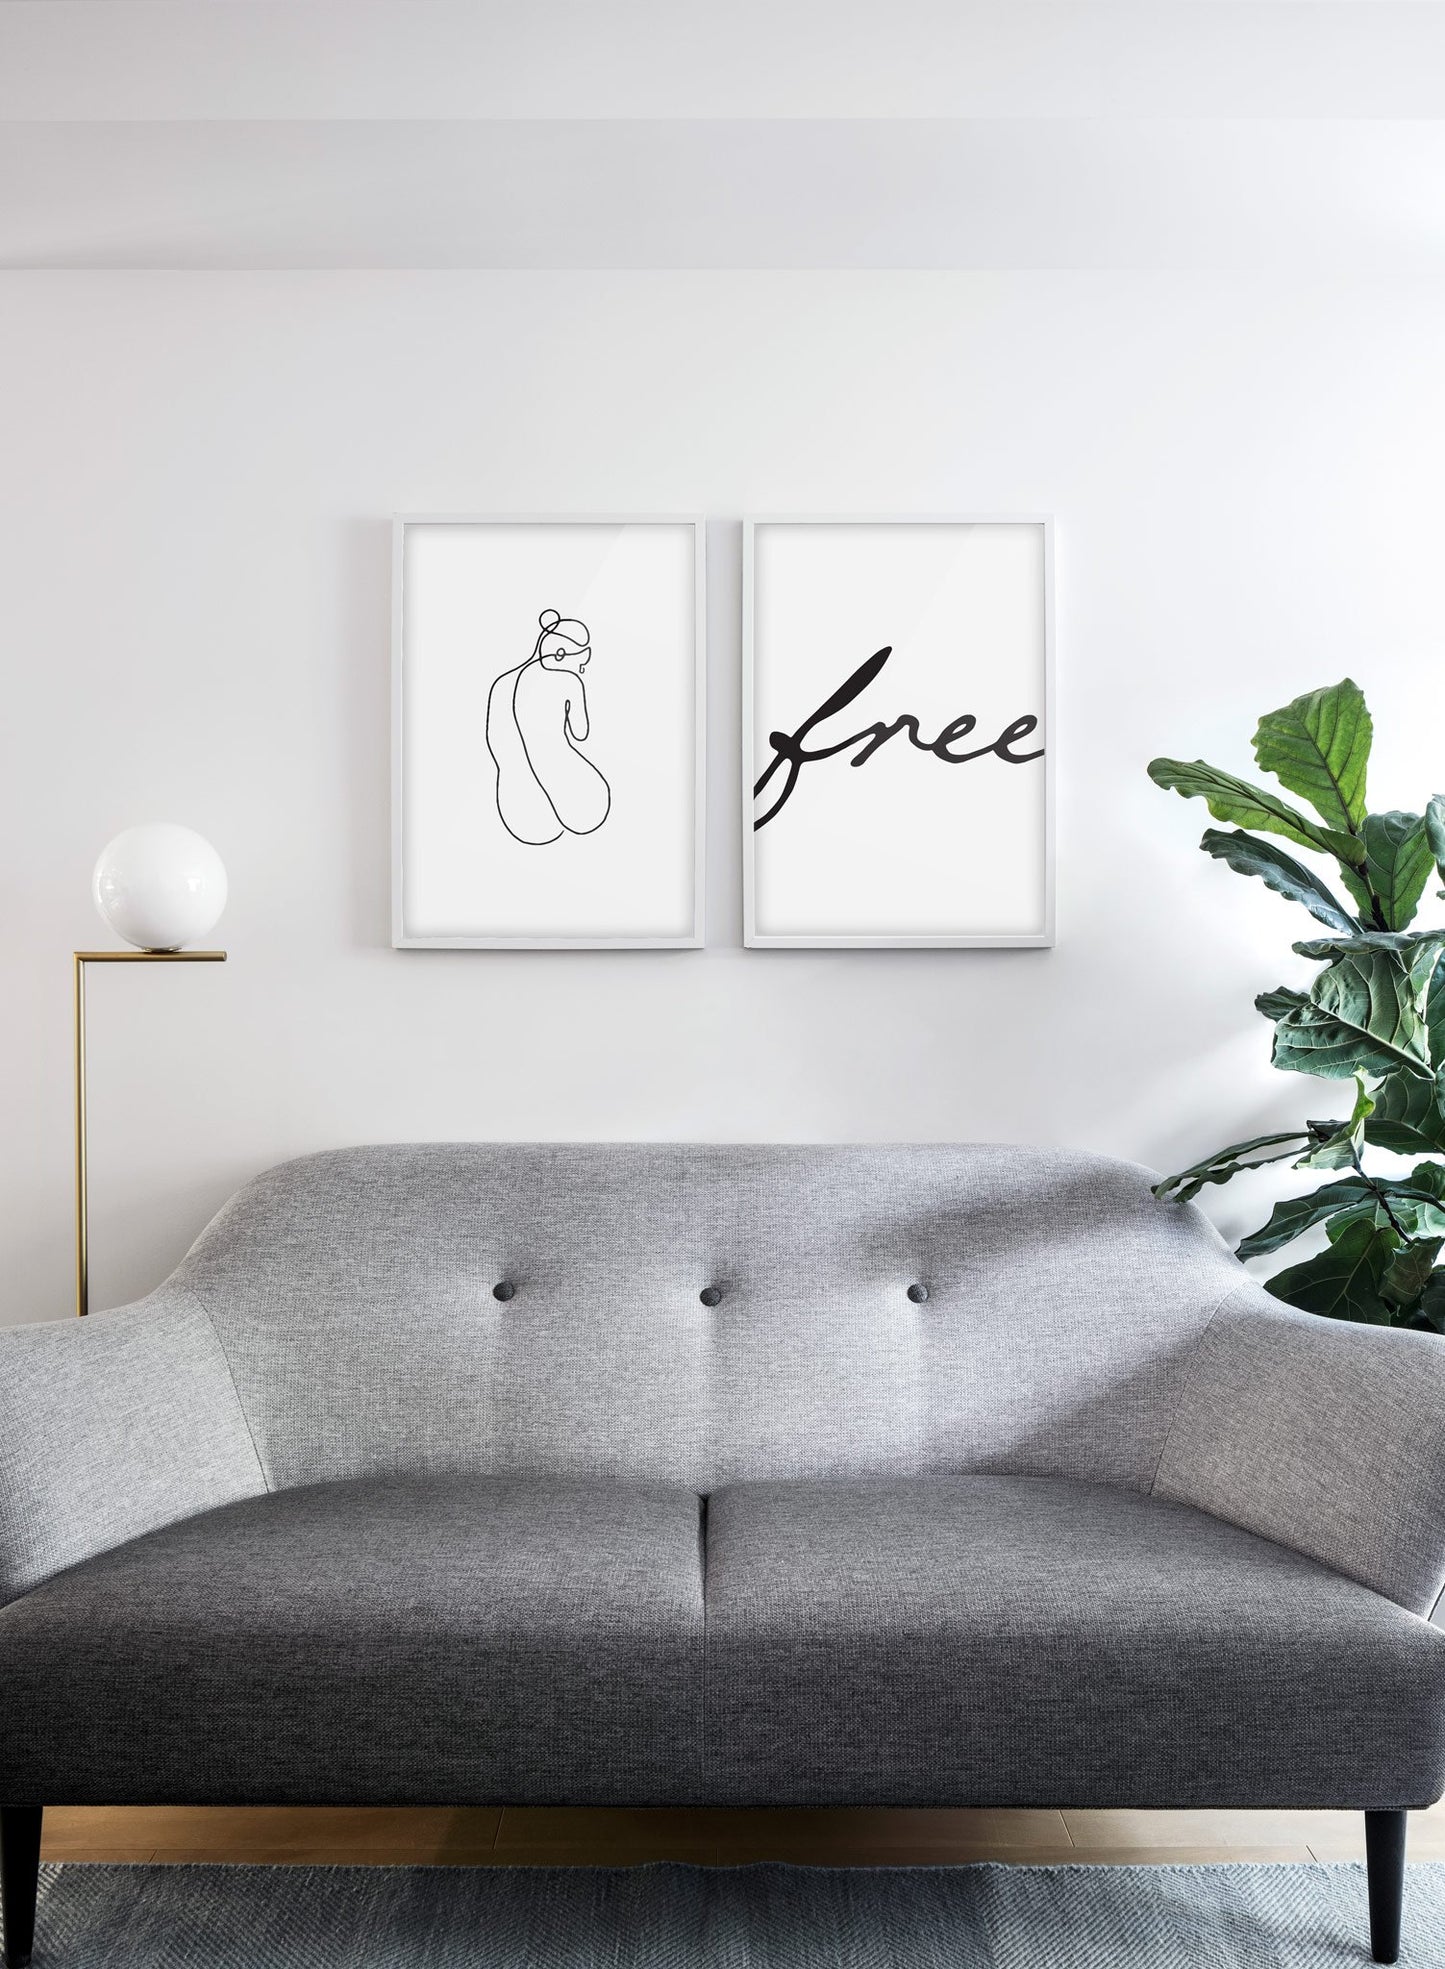 Scandinavian poster with black and white graphic typography design of Free and abstract illustration of silhouette - Living room